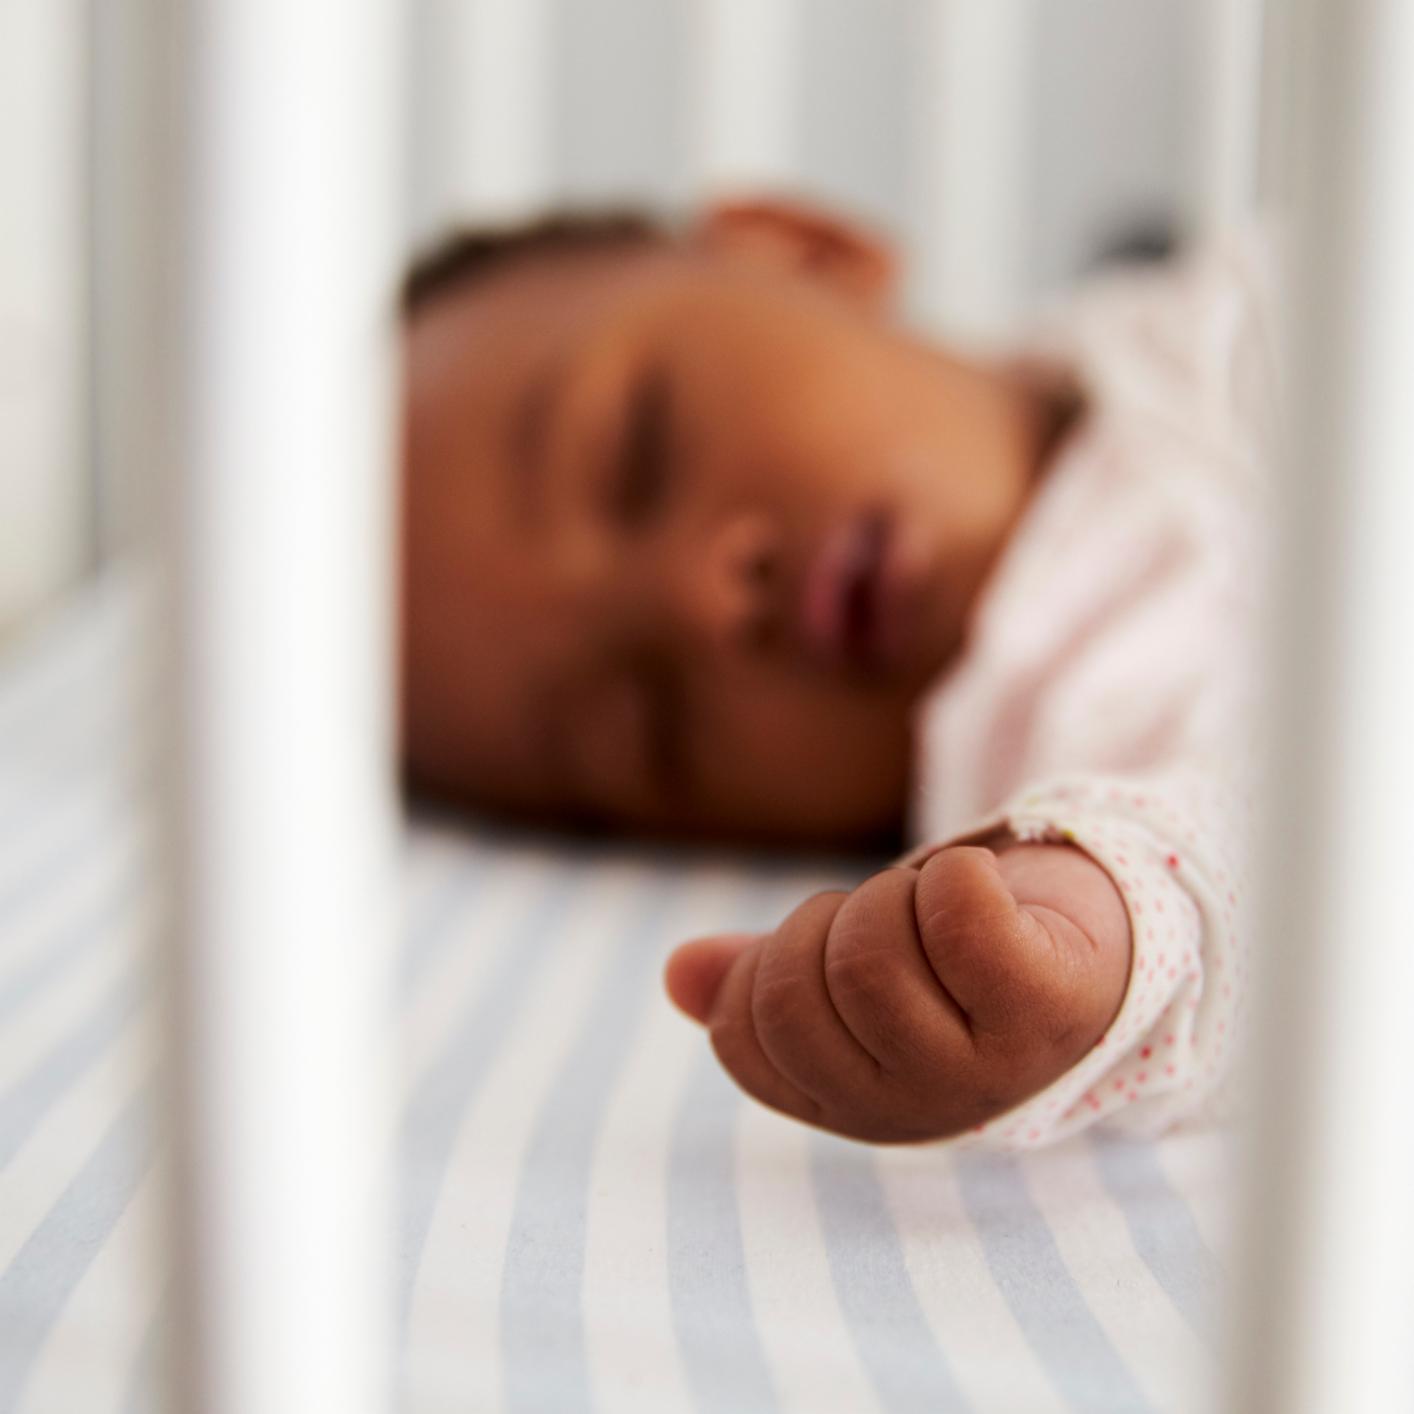 SAFE SLEEP: Traveling for the holidays? Make sure your baby has a safe place to sleep